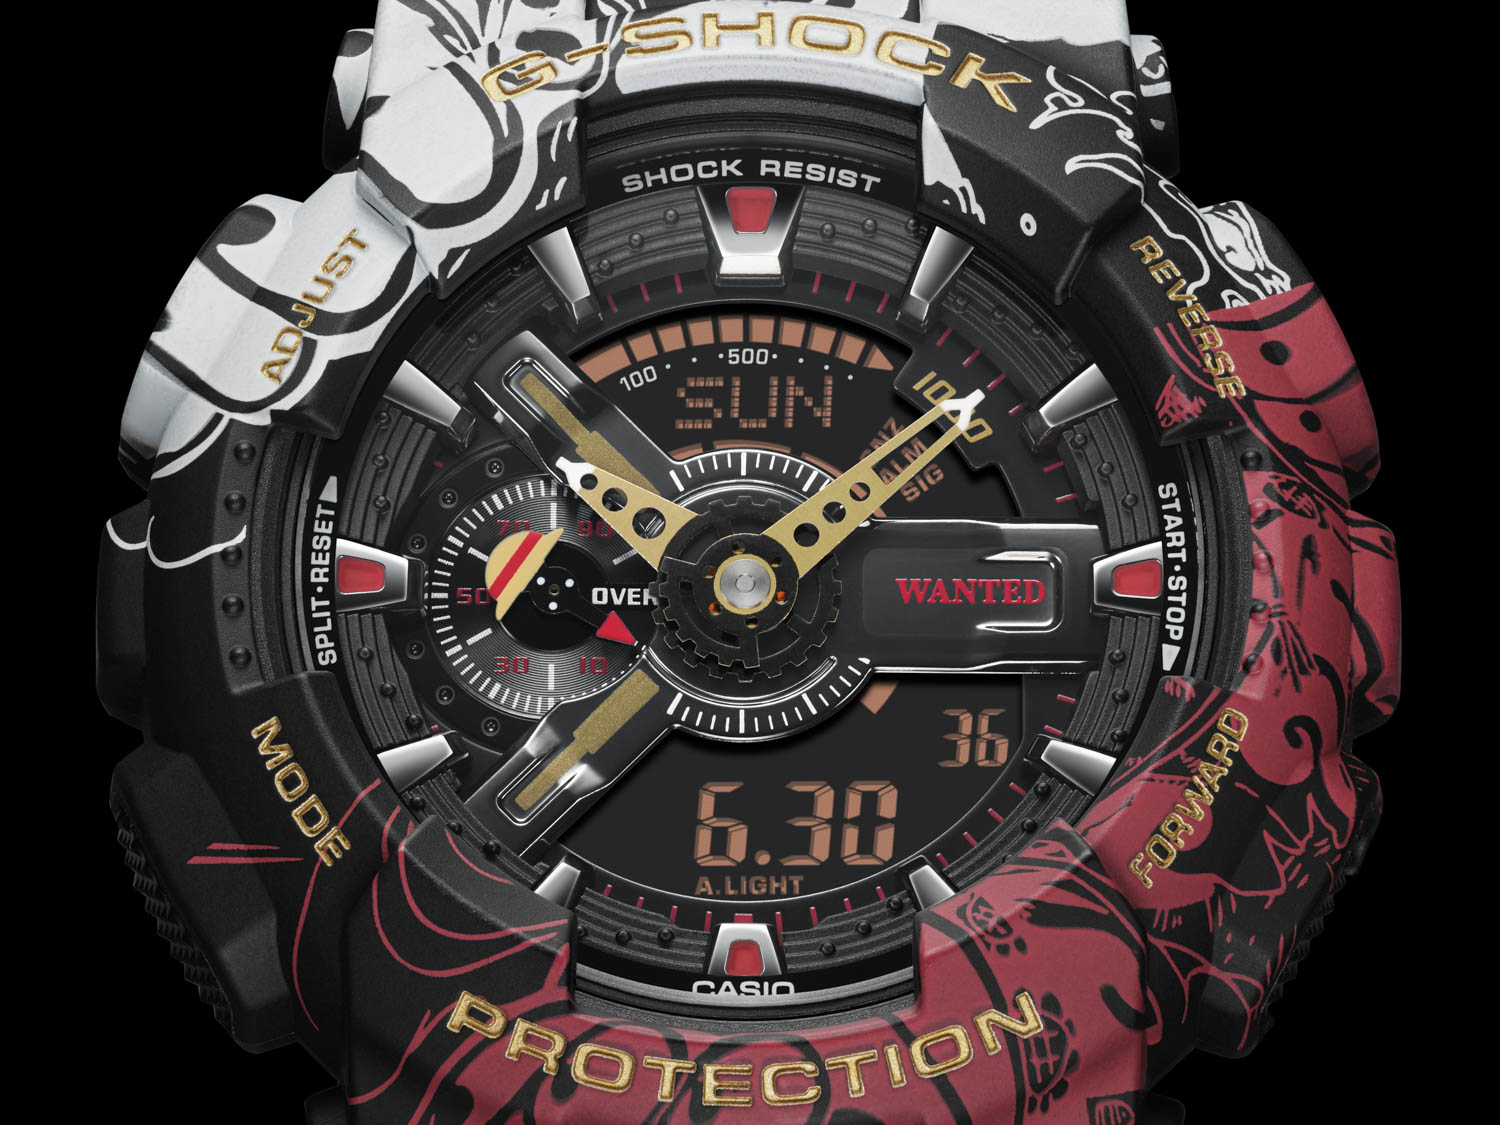 GShock announces limitededition watches for Streetwear One Piece anime  fans  Wearables News